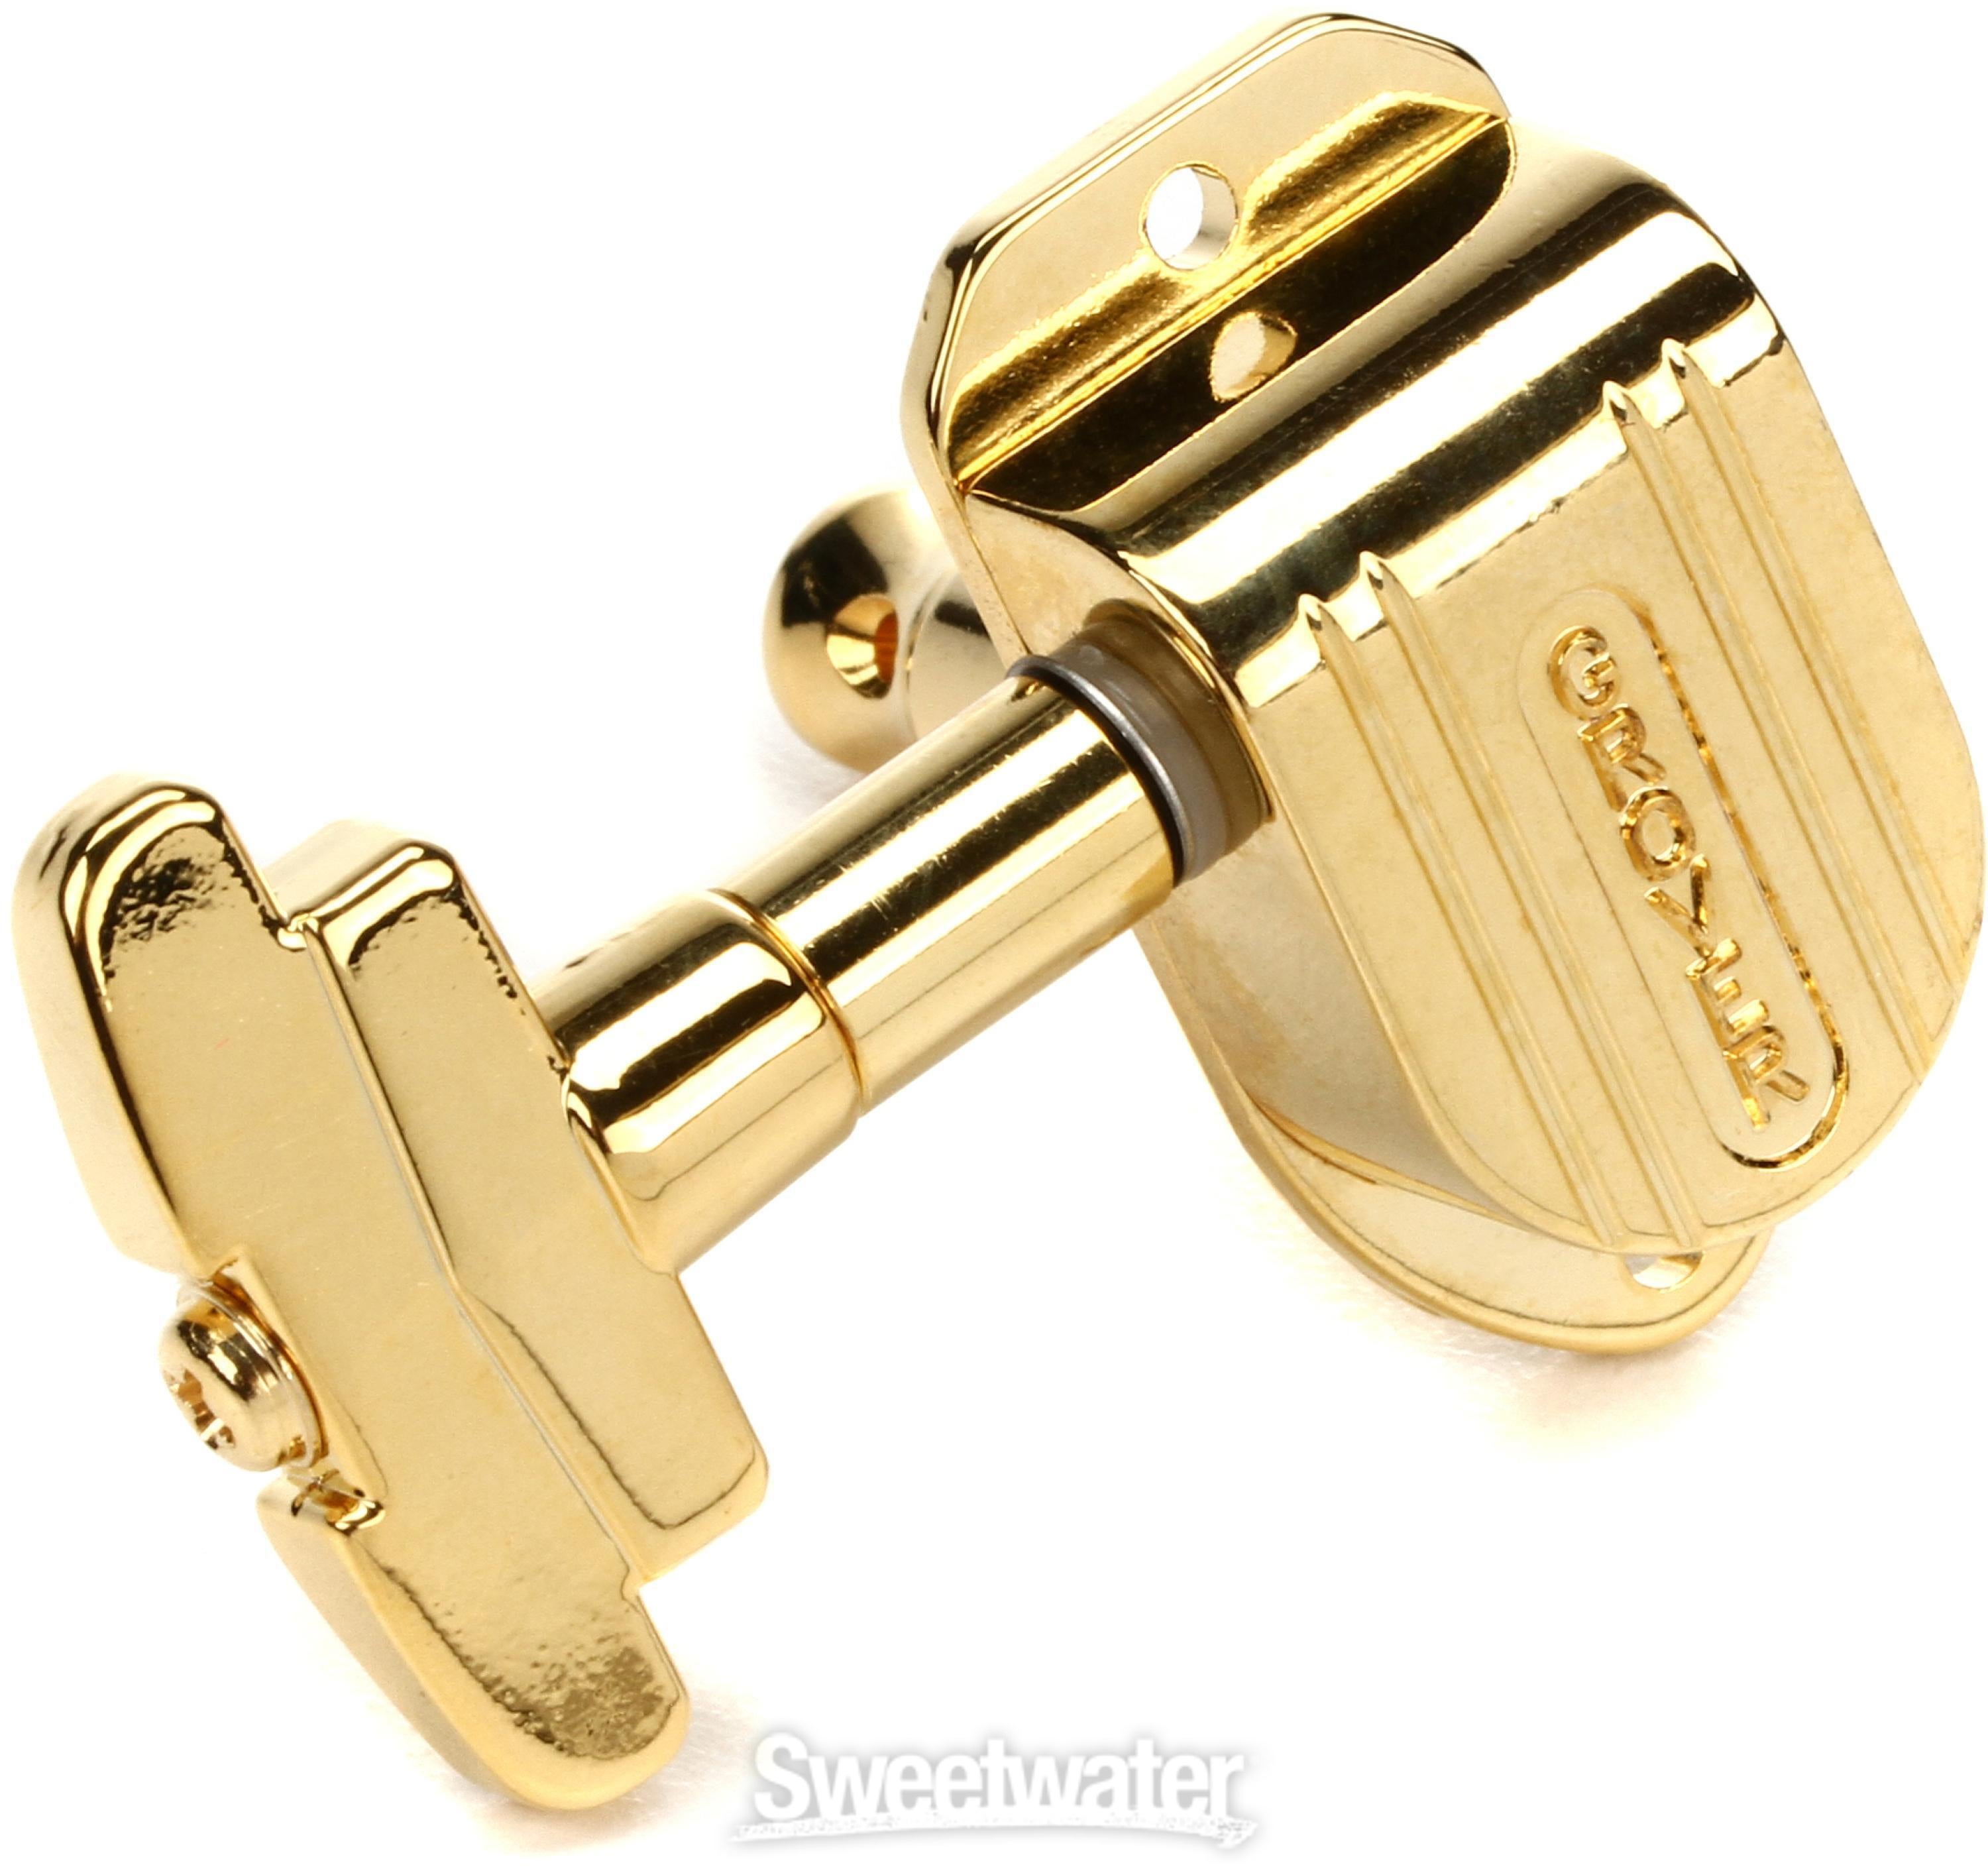 Grover 150G Imperial Tuners - 3+3 - Gold